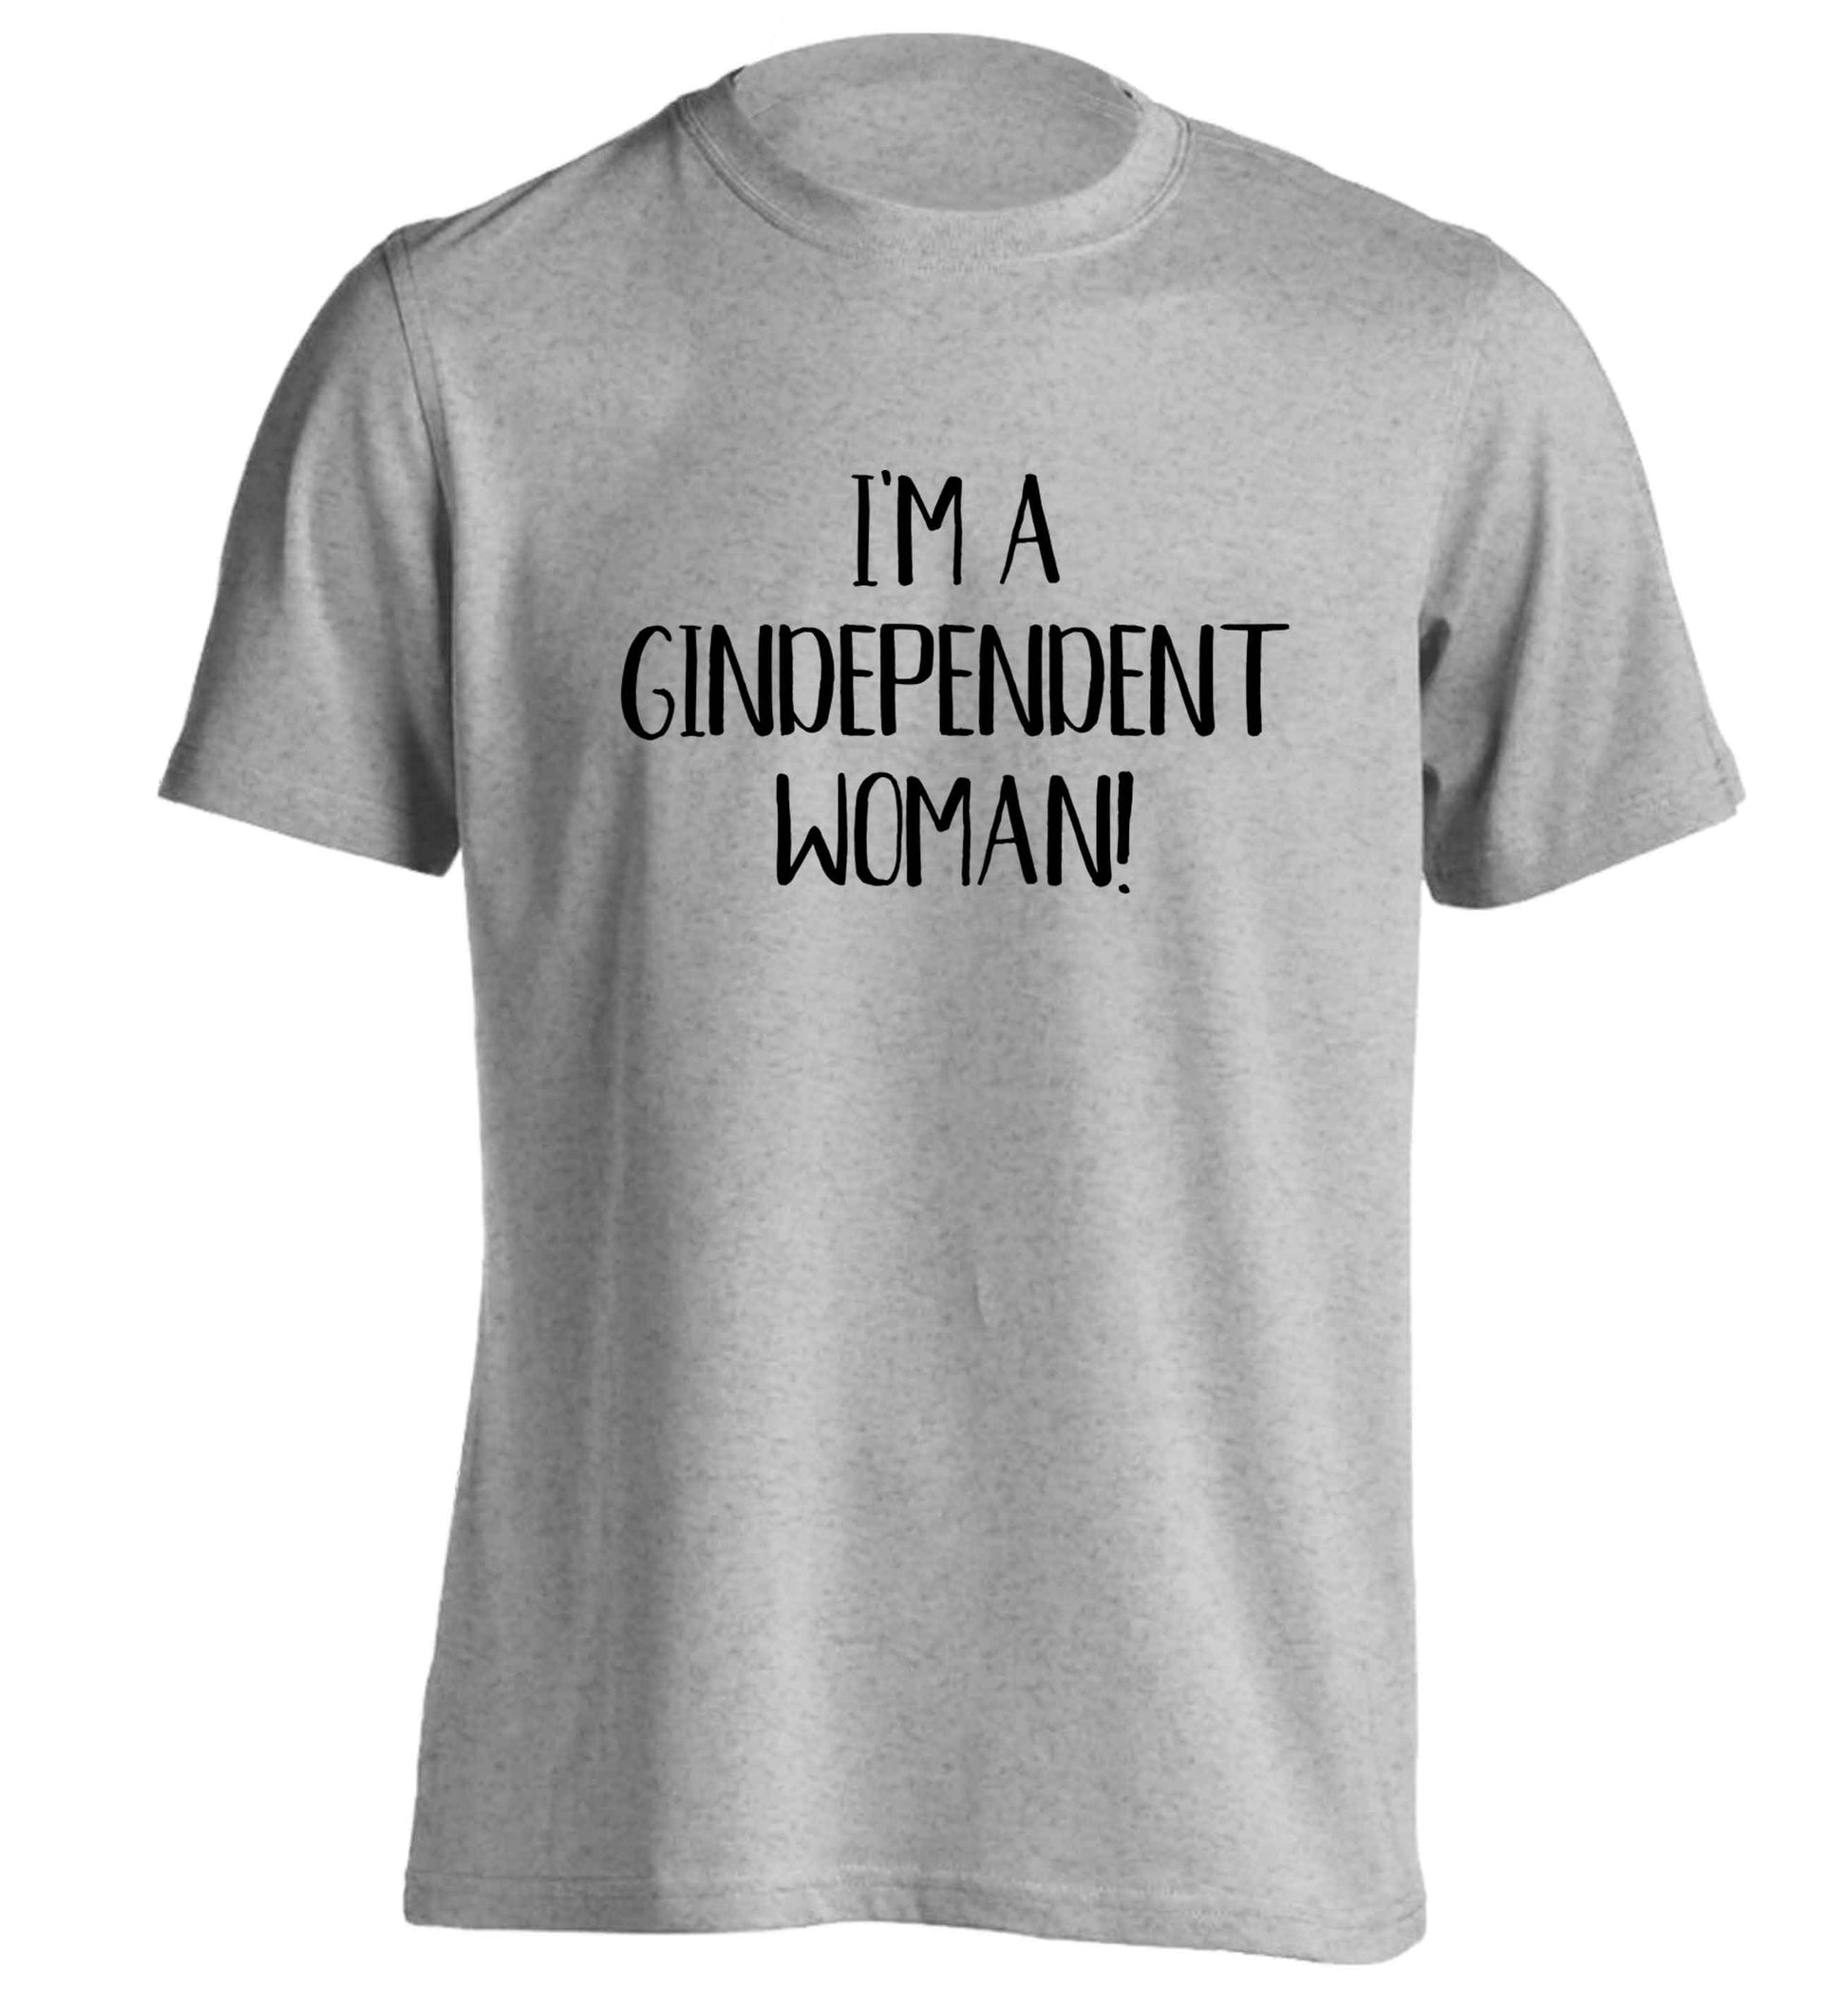 I'm a gindependent woman adults unisex grey Tshirt 2XL